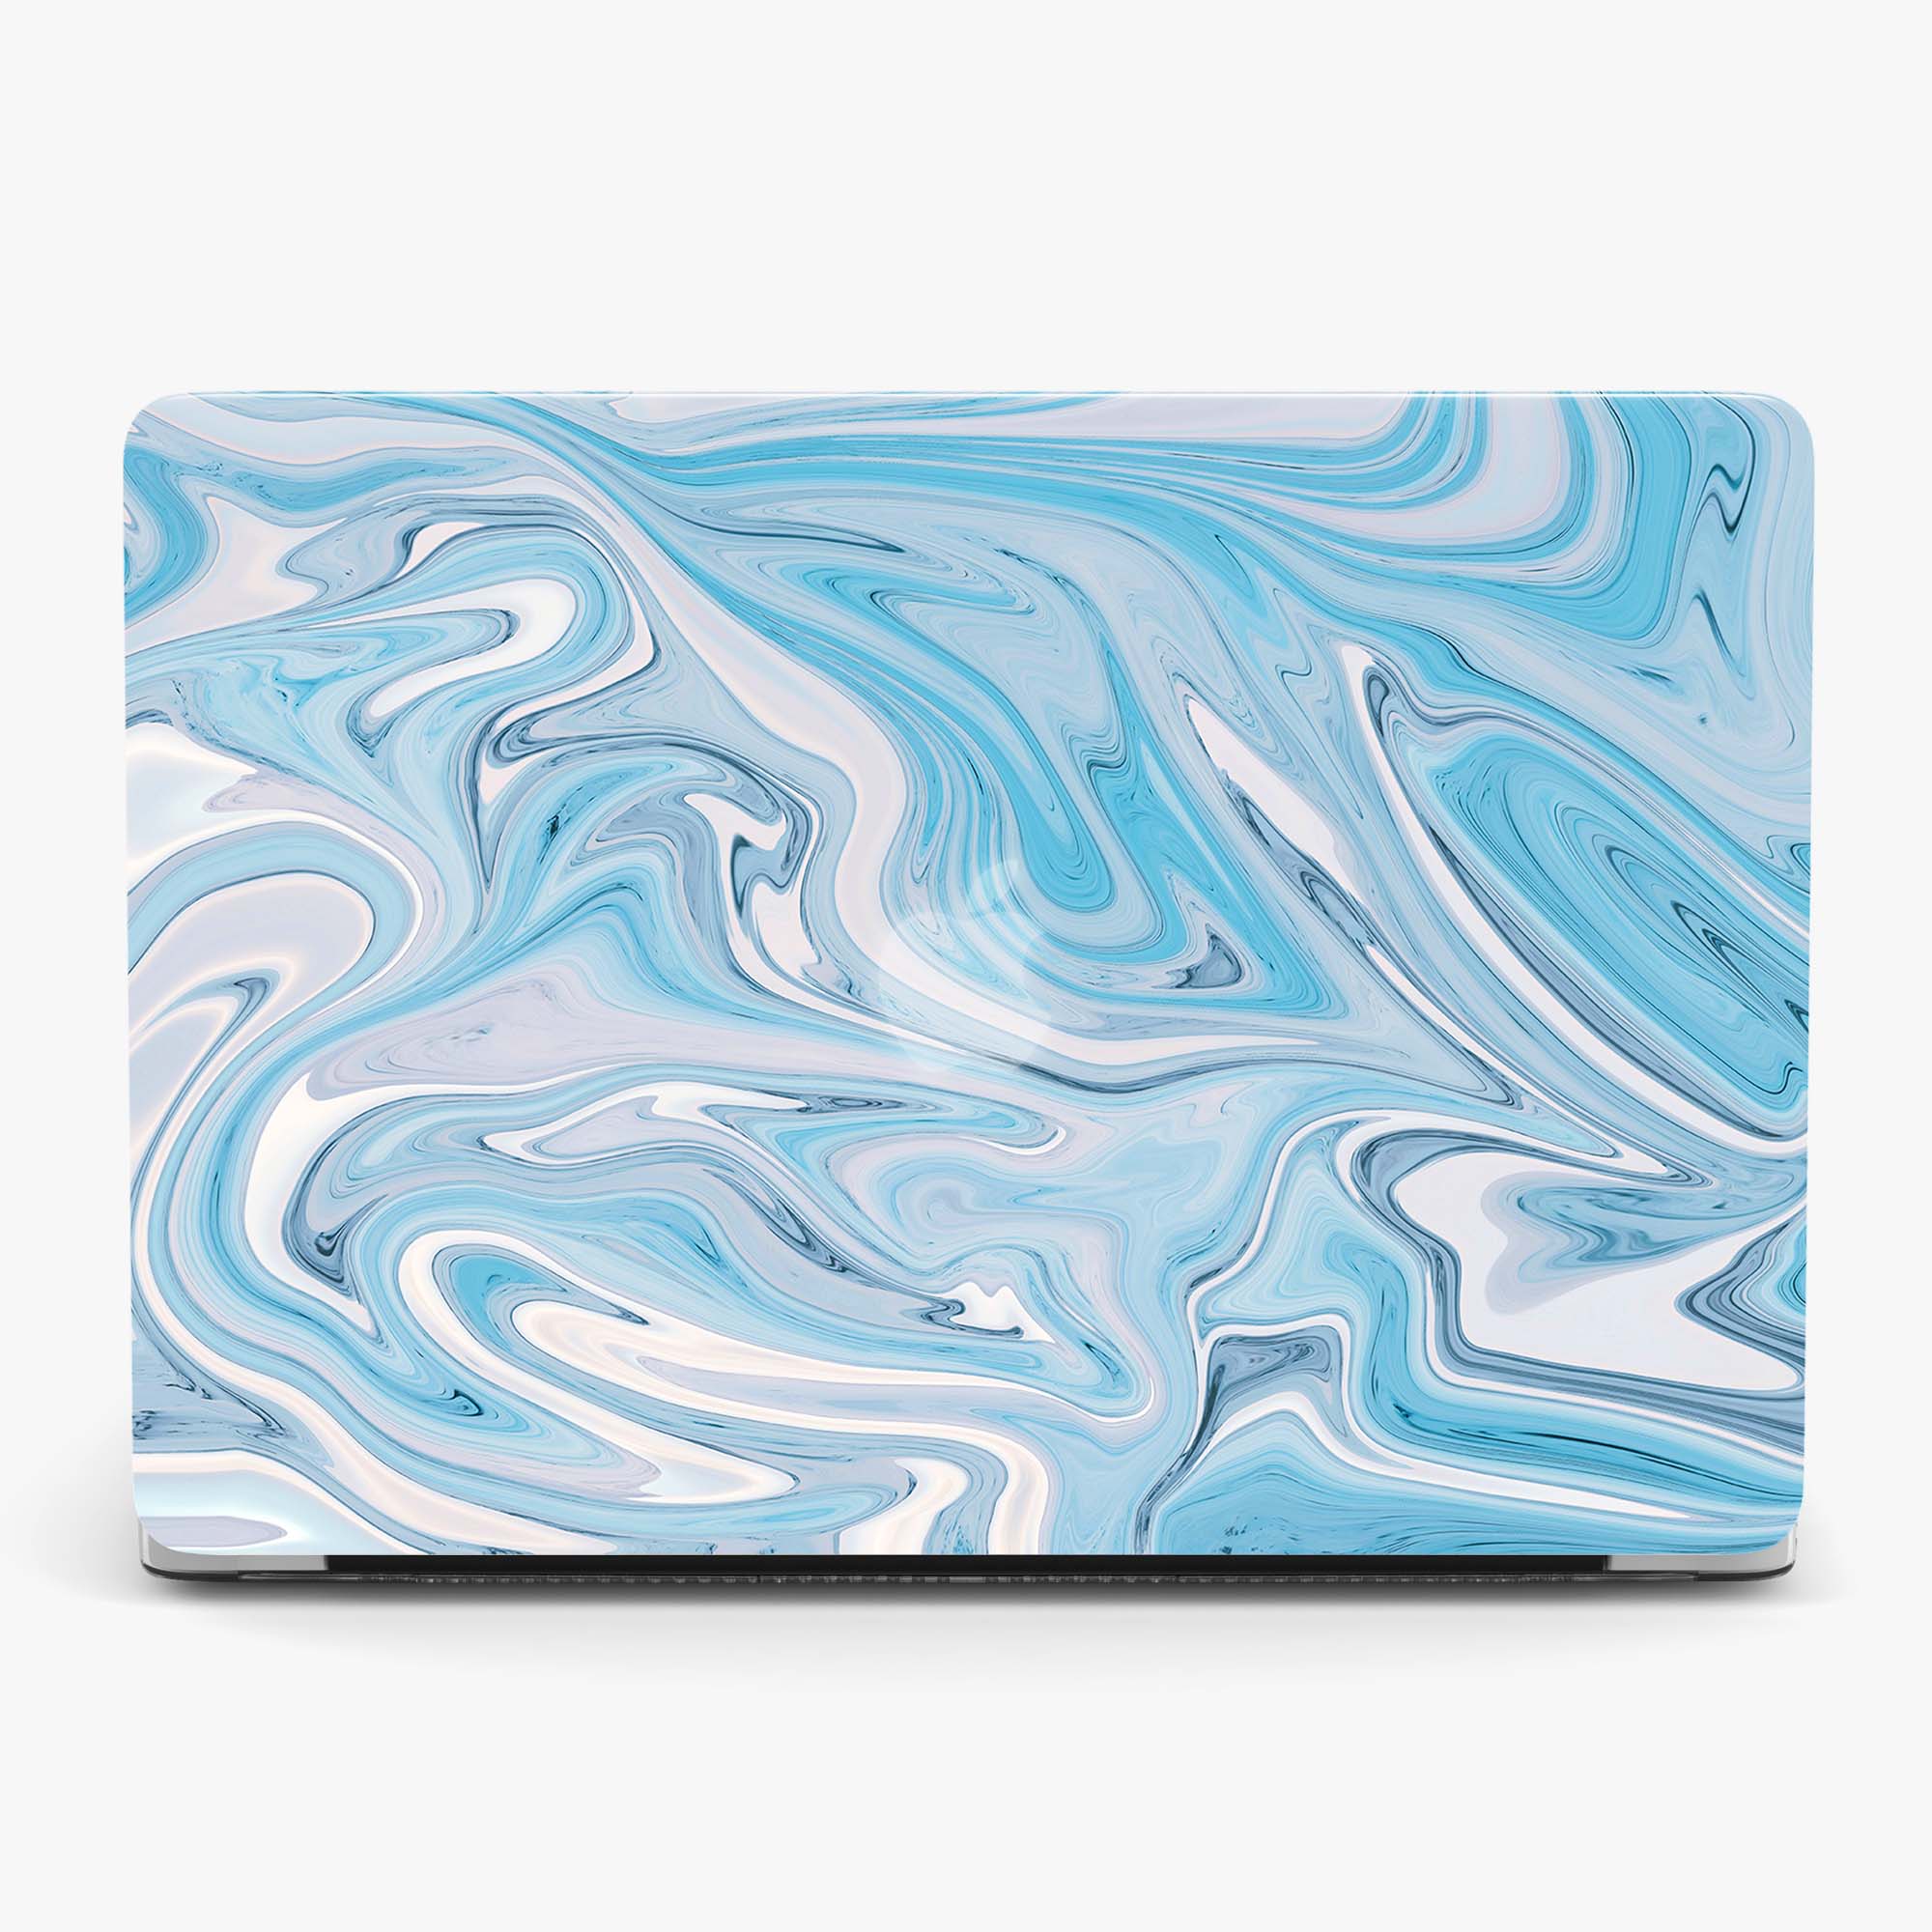 Liquid Vein Painting Hard Shell Abstract Graphic Modern Rubberized Laptop Case for Macbook